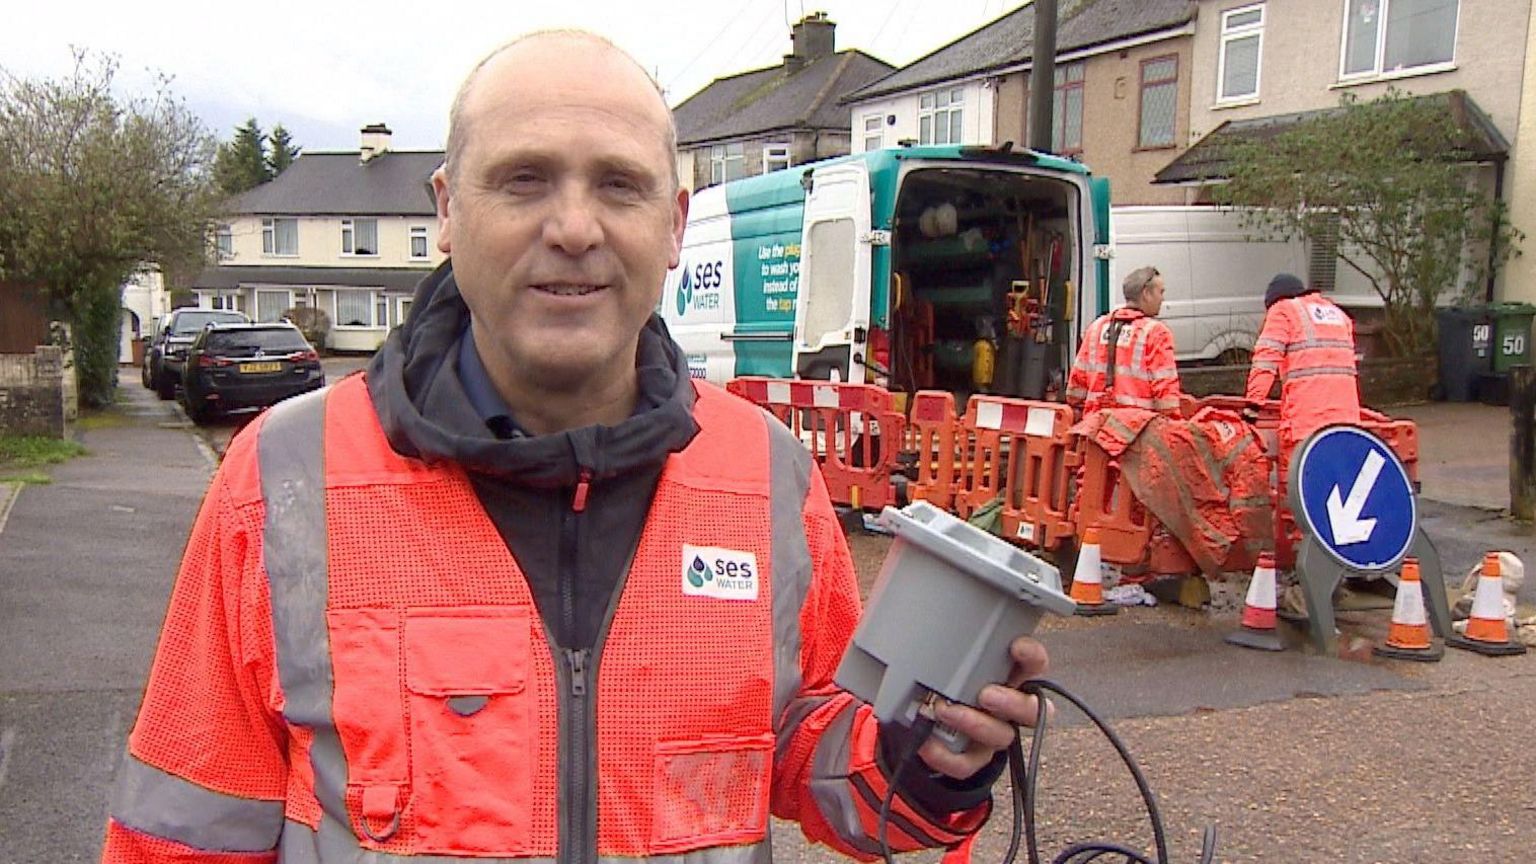 Jeremy Heath wearing a hi-vis jacket holding one of the devices